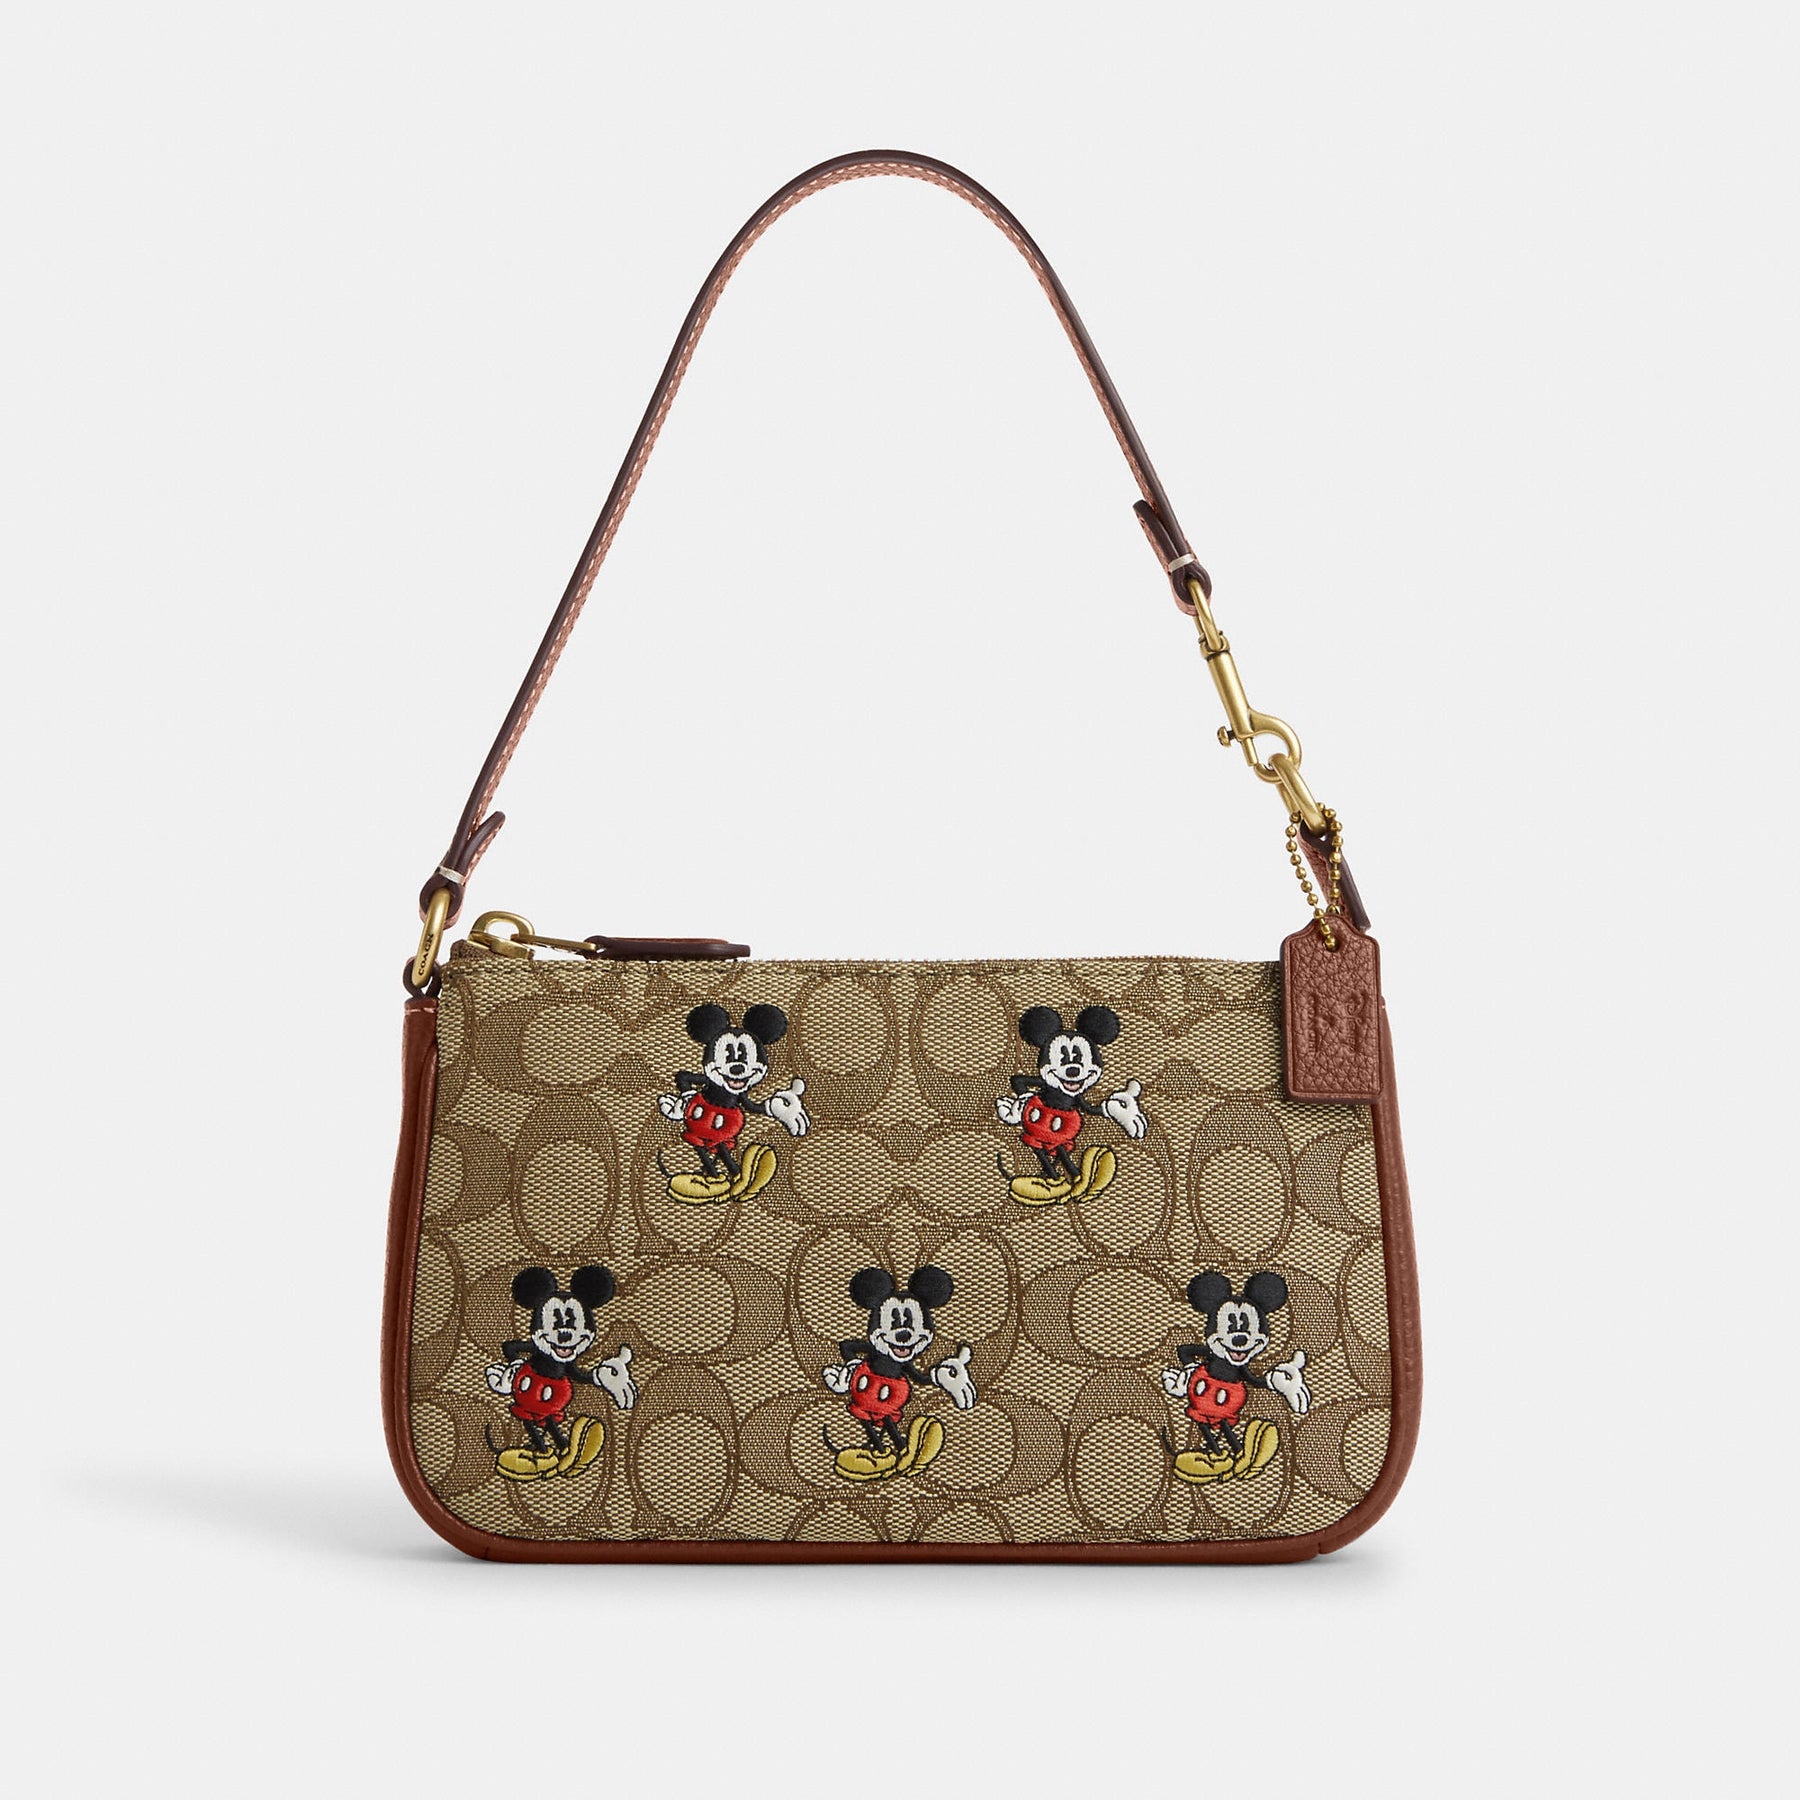 Coach Outlet Disney X Small Zip Around Wallet In Signature Jacquard With Mickey Mouse Print - Women's Wallets - multi